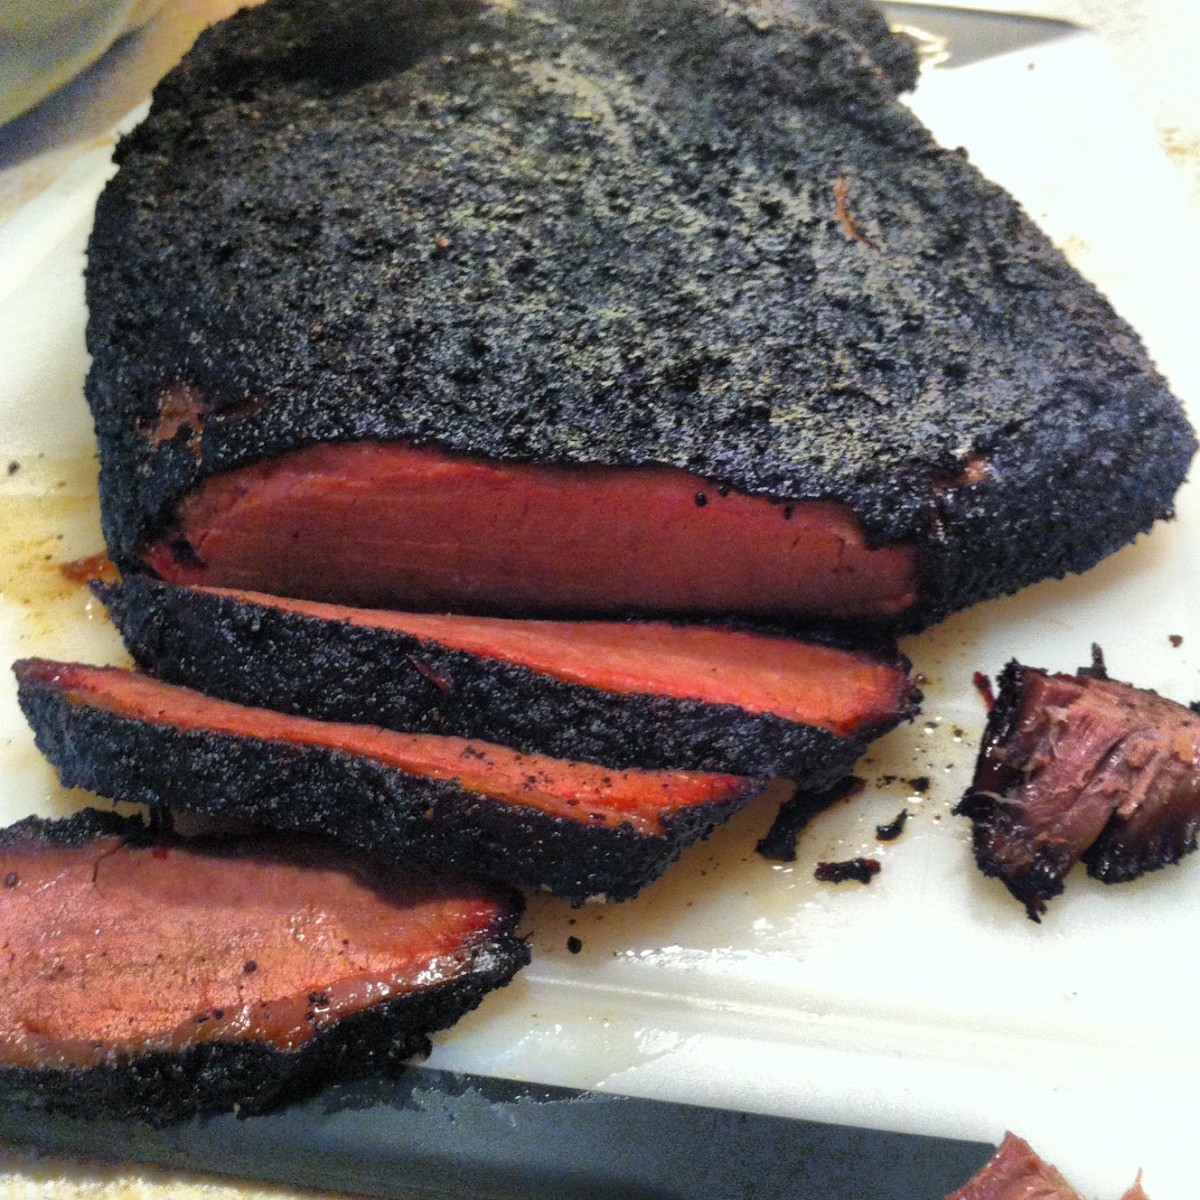 Brisket that is grilled to perfection